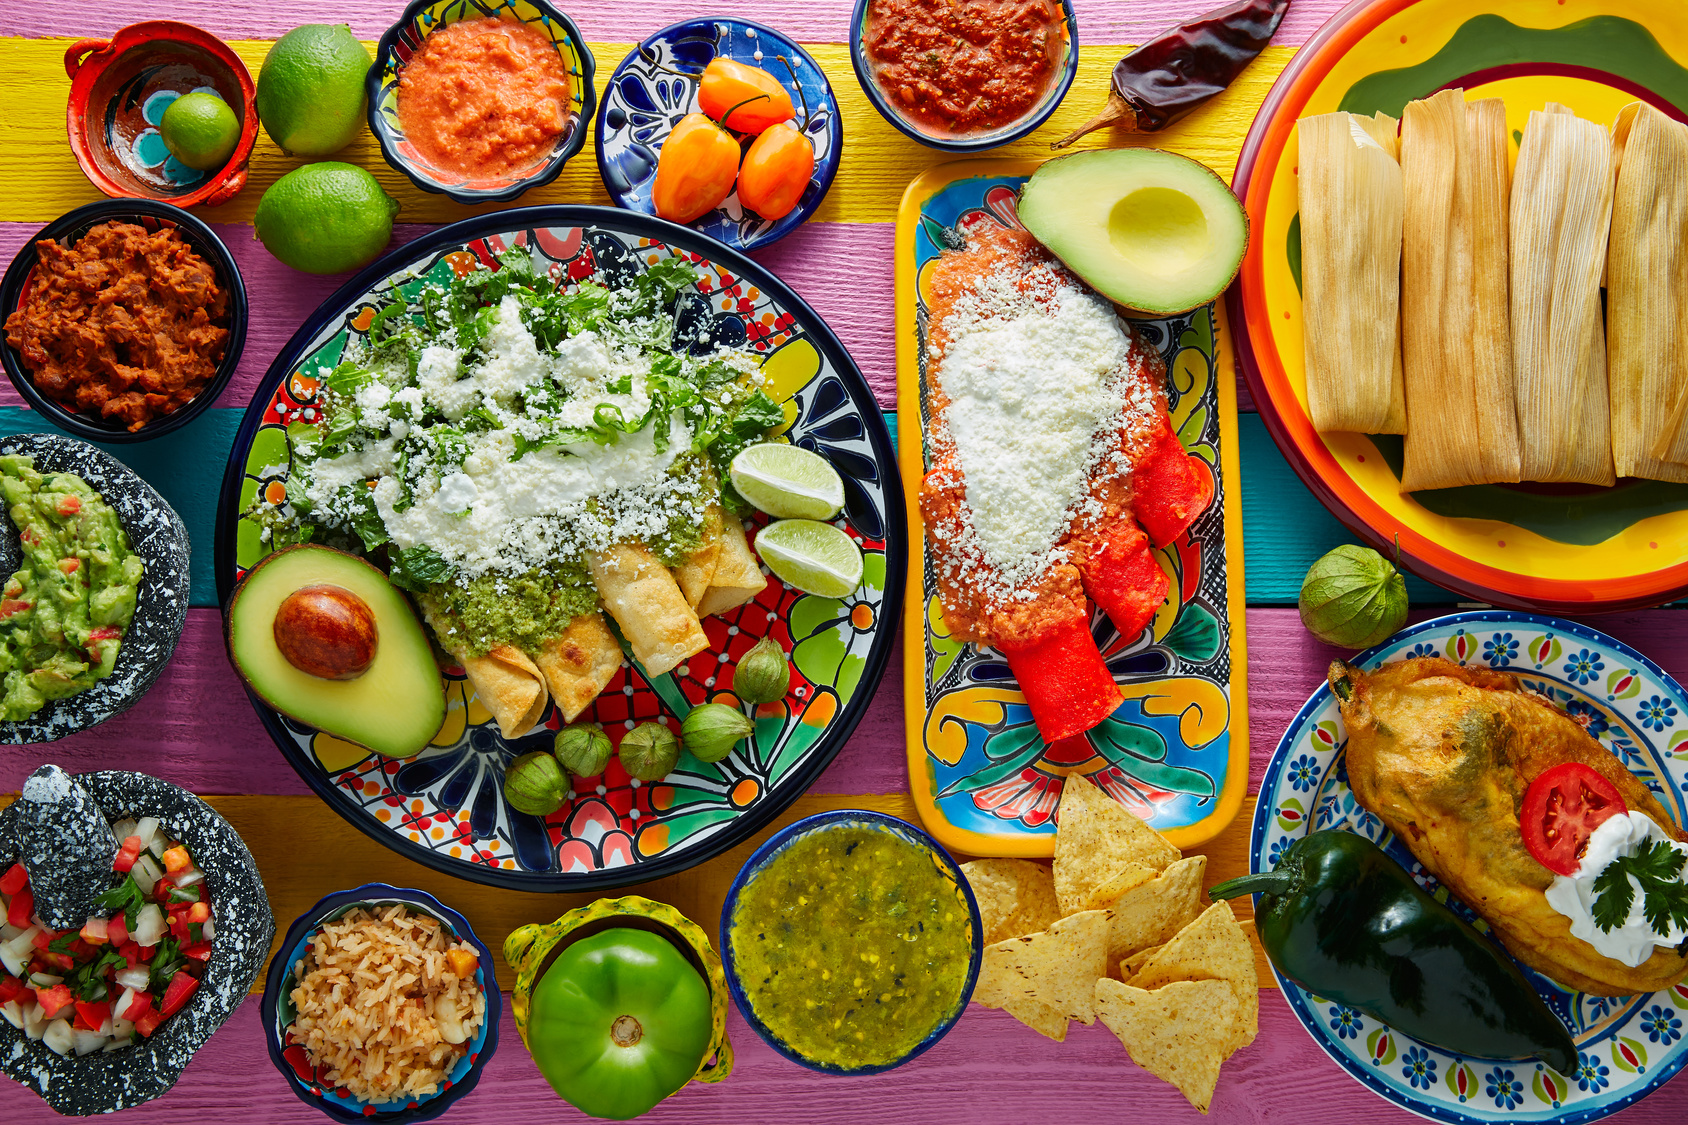 Green and red enchiladas with mexican sauces mix in colorful table